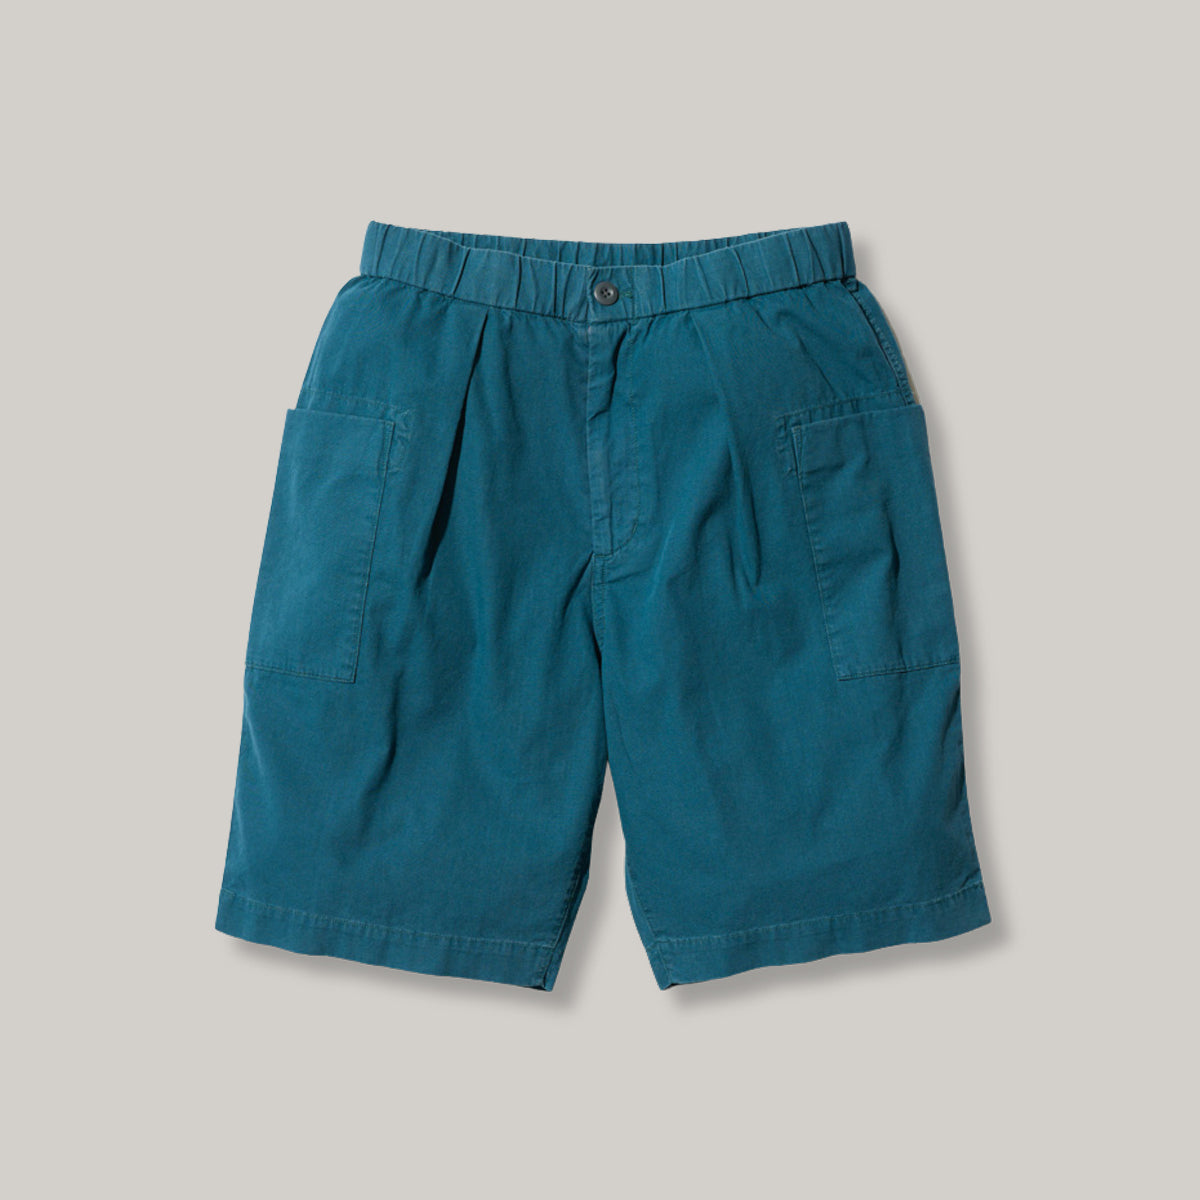 SNOW PEAK NATURAL DYED RECYCLED COTTON SHORTS - BLUE